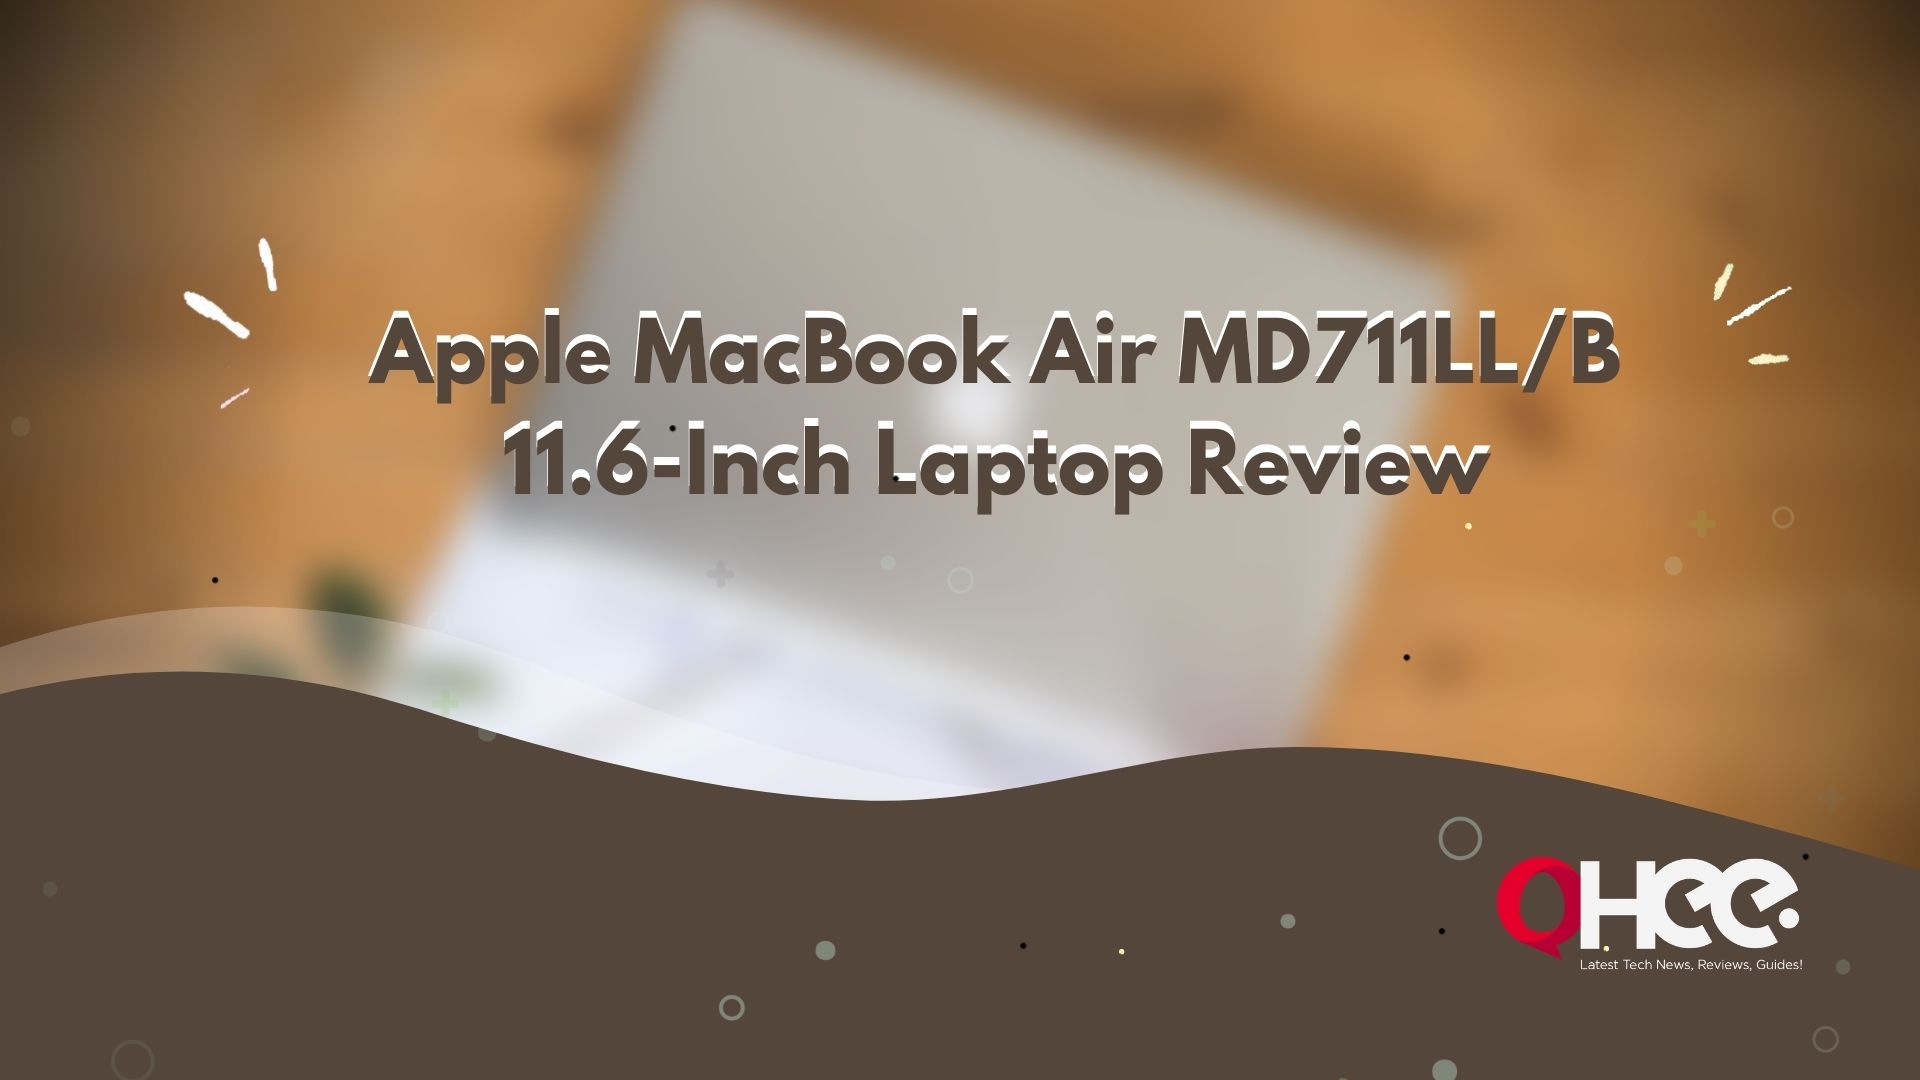 Apple MacBook Air MD711LL/B 11.6-Inch Laptop Review